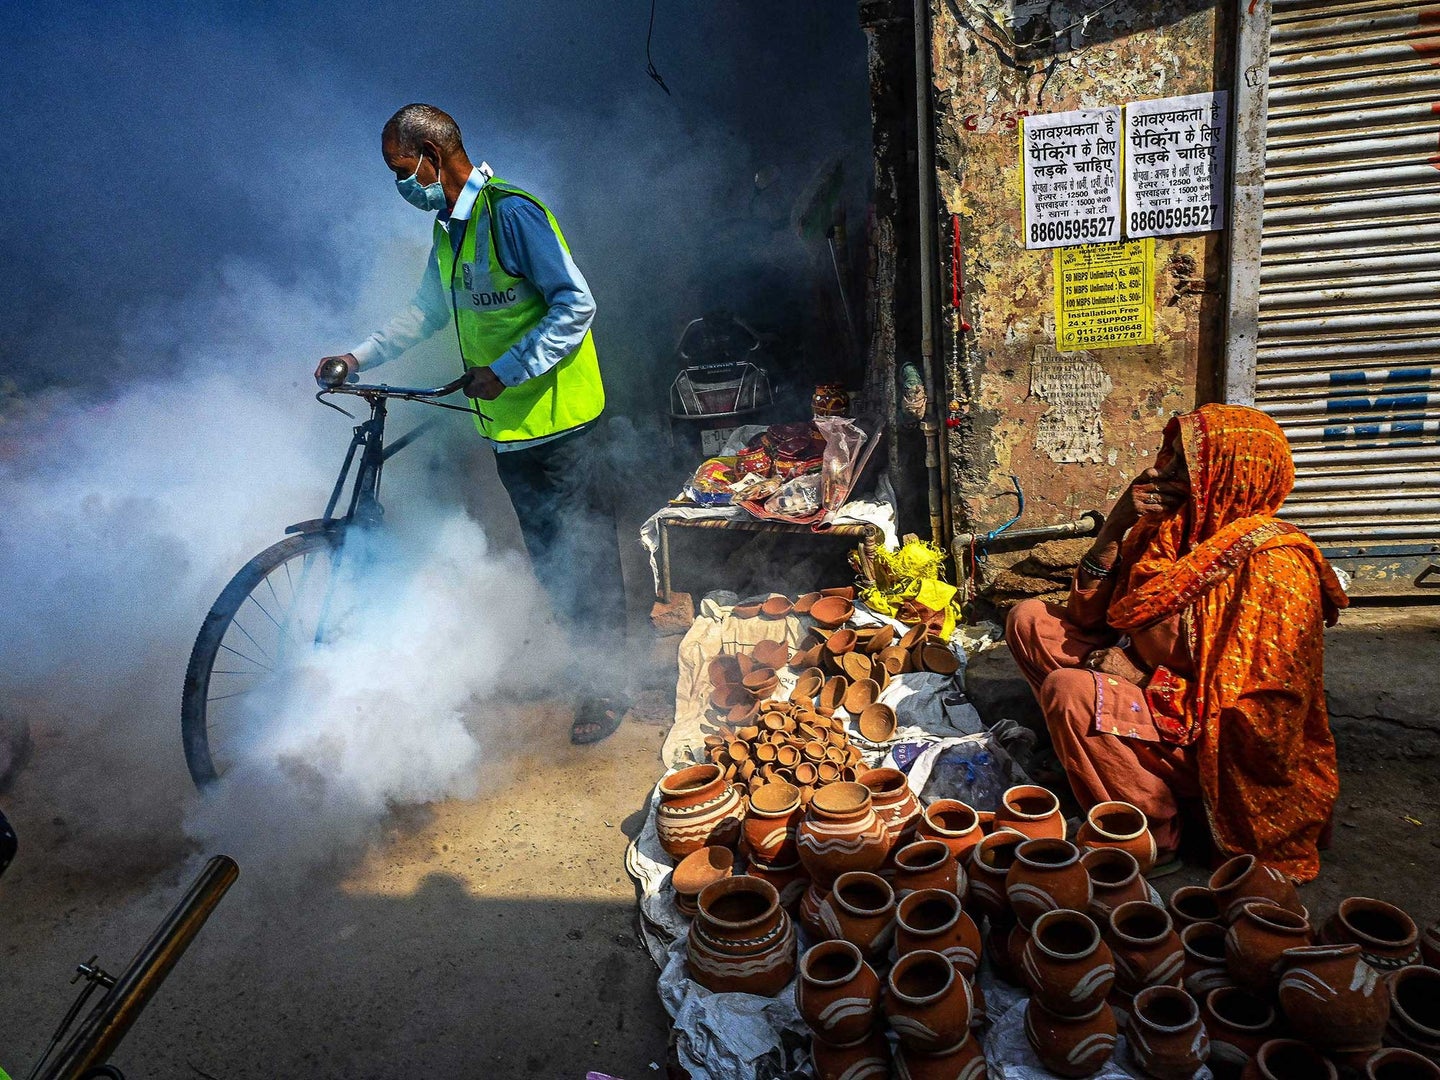 South Delhi Municipal Corporation (SDMC) workers fumigate an area to prevent mosquito breeding in New Delhi on October 27, 2021.